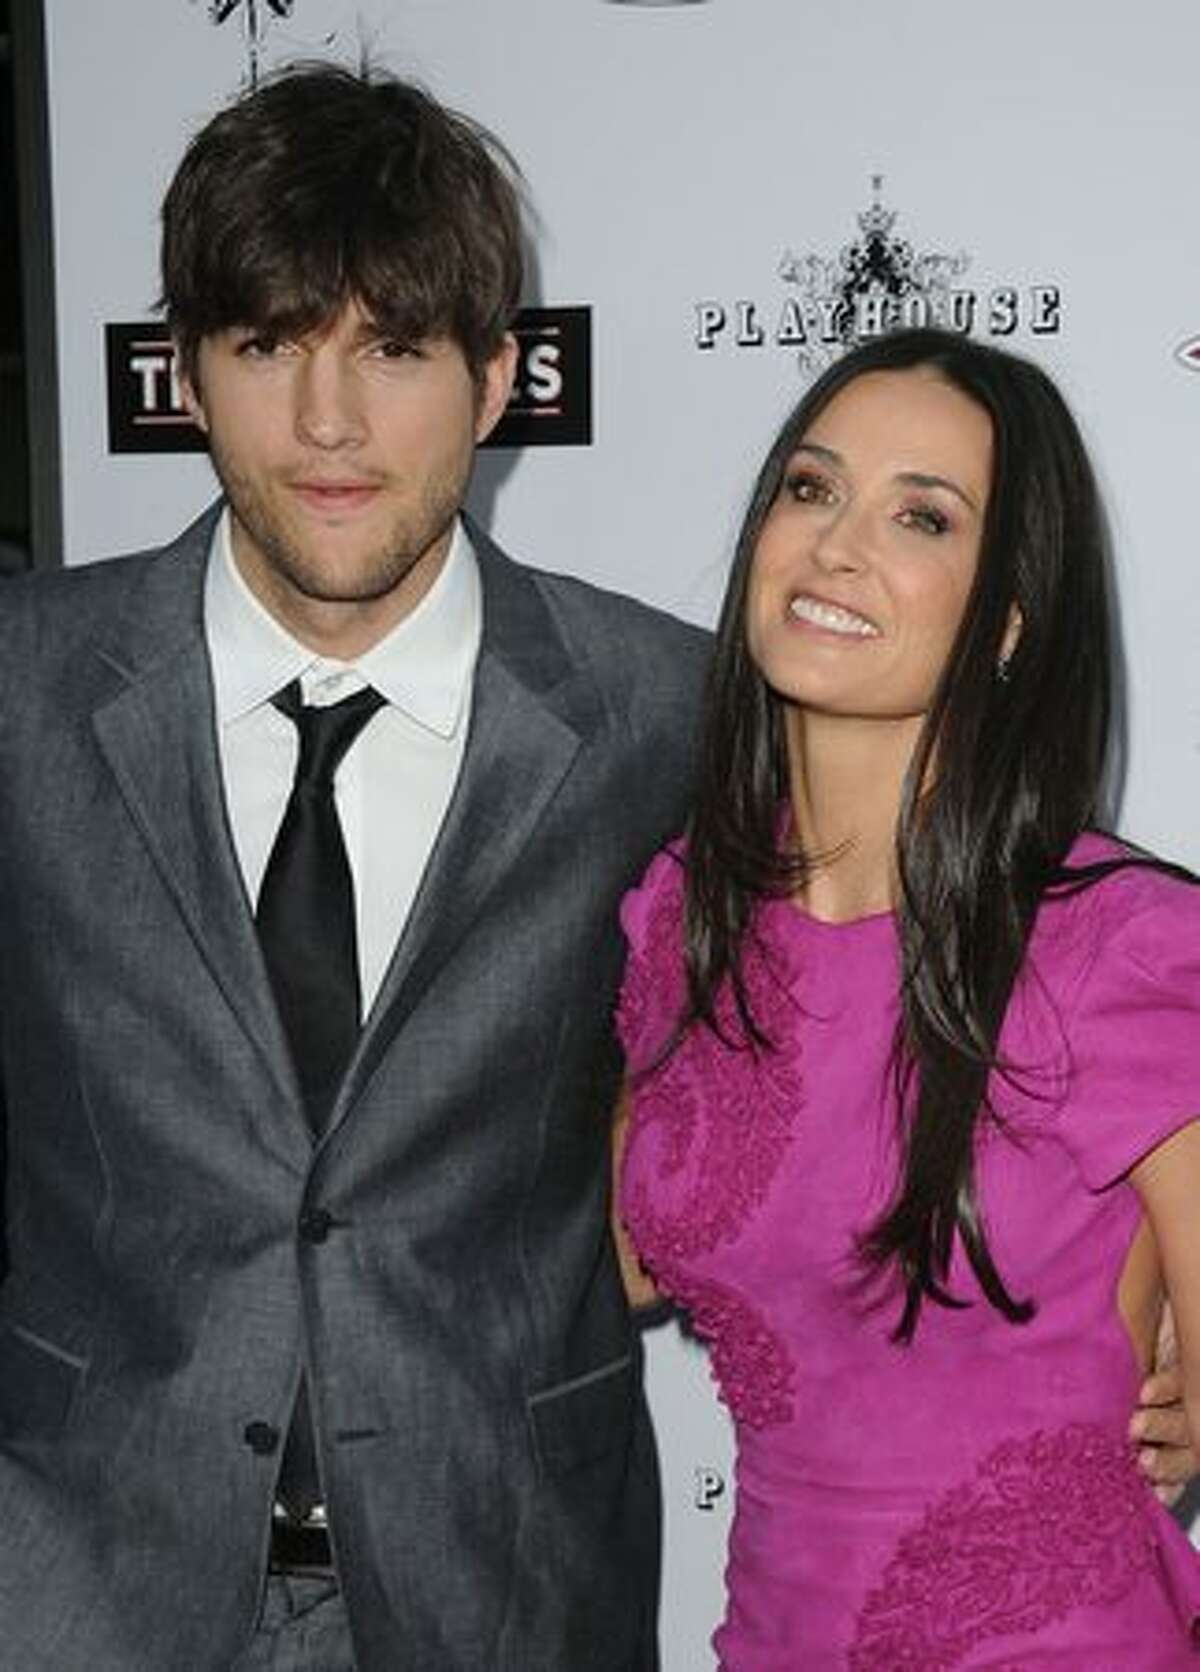 Actors Ashton Kutcher and Demi Moore arrive at Roadside Attractions & Echo Lake Entertainment's premiere of 'The Joneses' held at Arclight Hollywood Cinema on April 8, 2010 in Los Angeles, California.